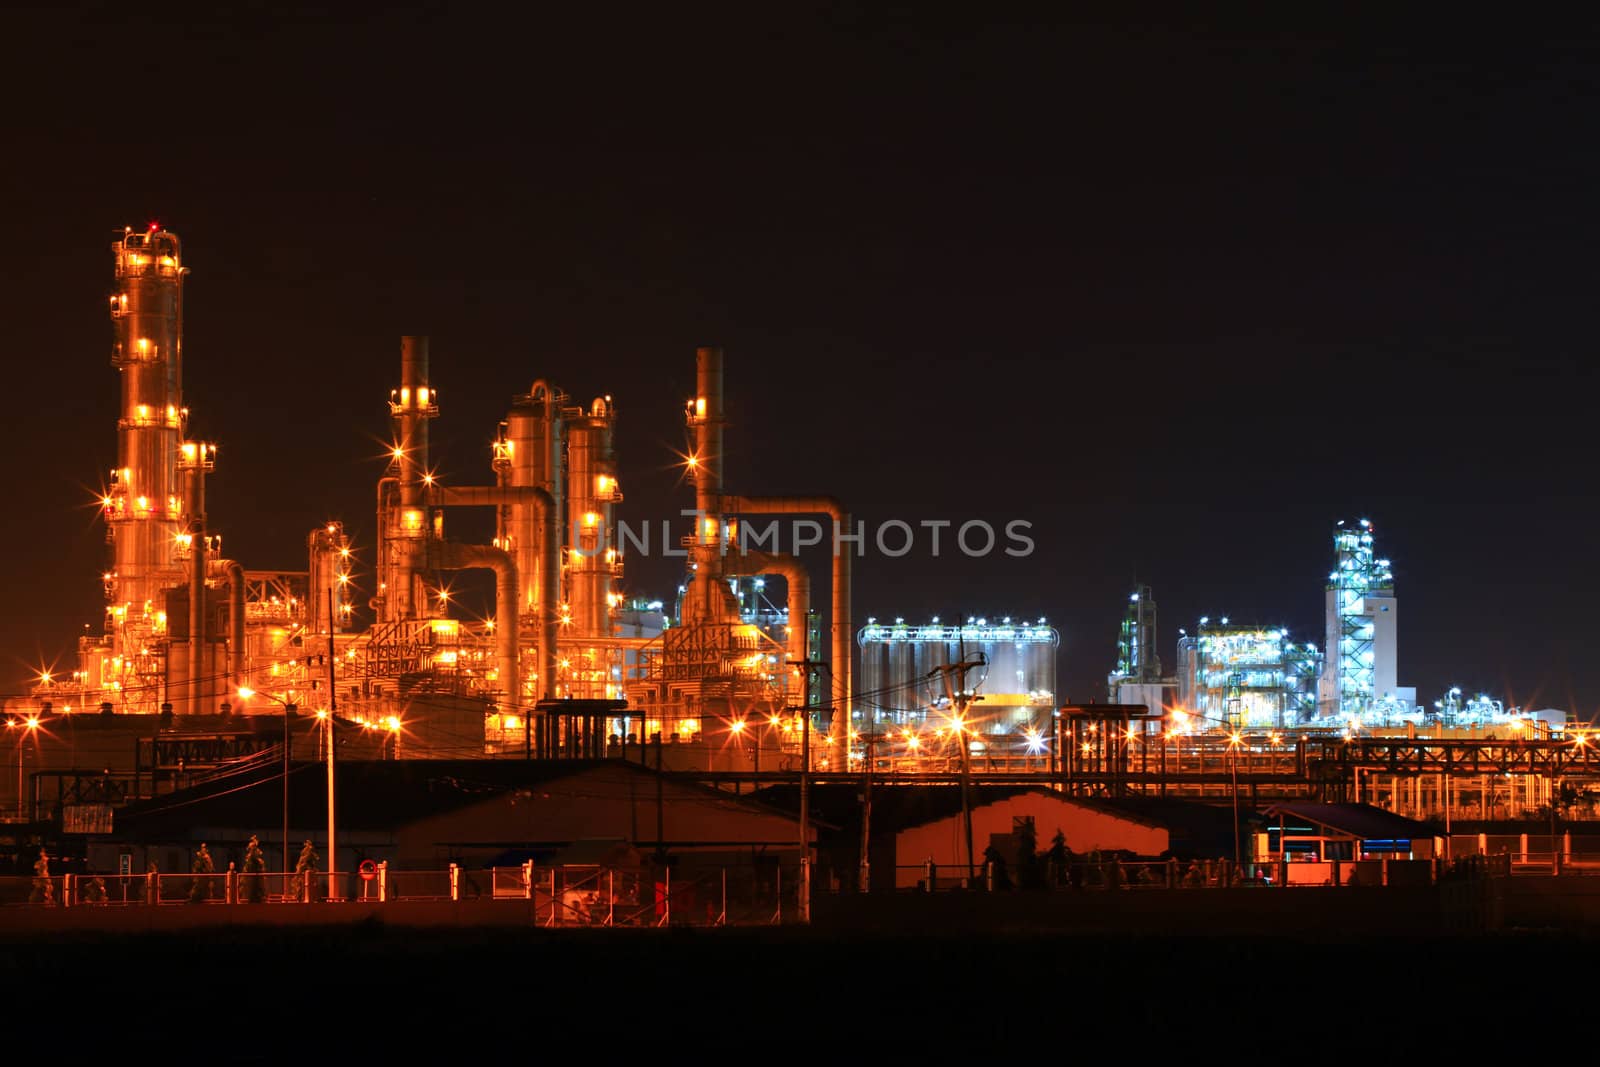 landscape of  petrochemical oil refinery plant at night